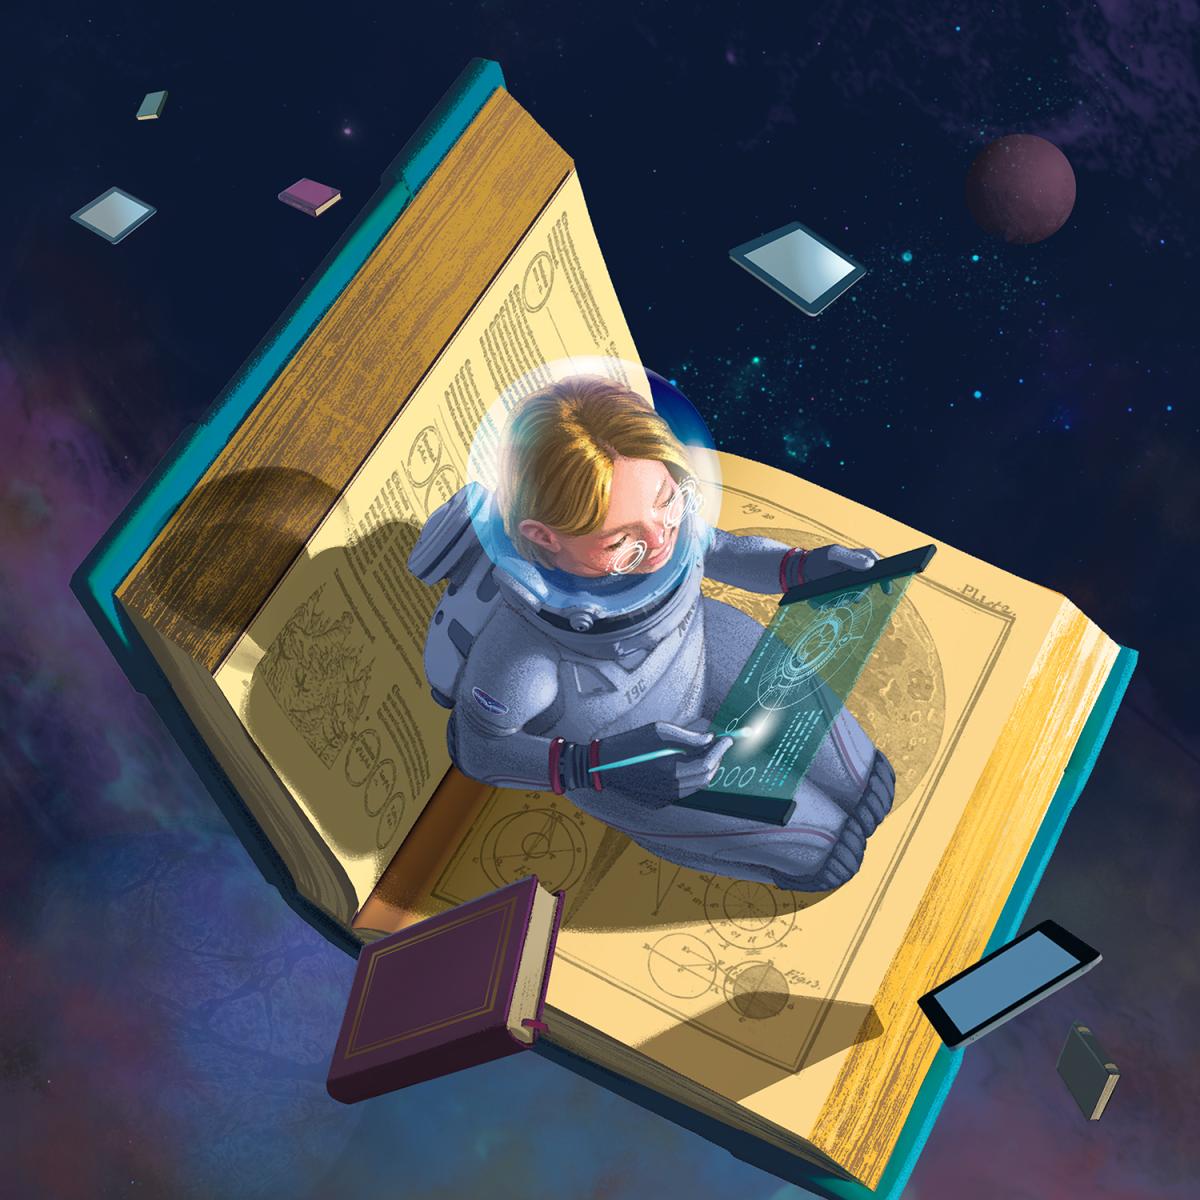 Teen in space sitting on book looking at a screen drawing